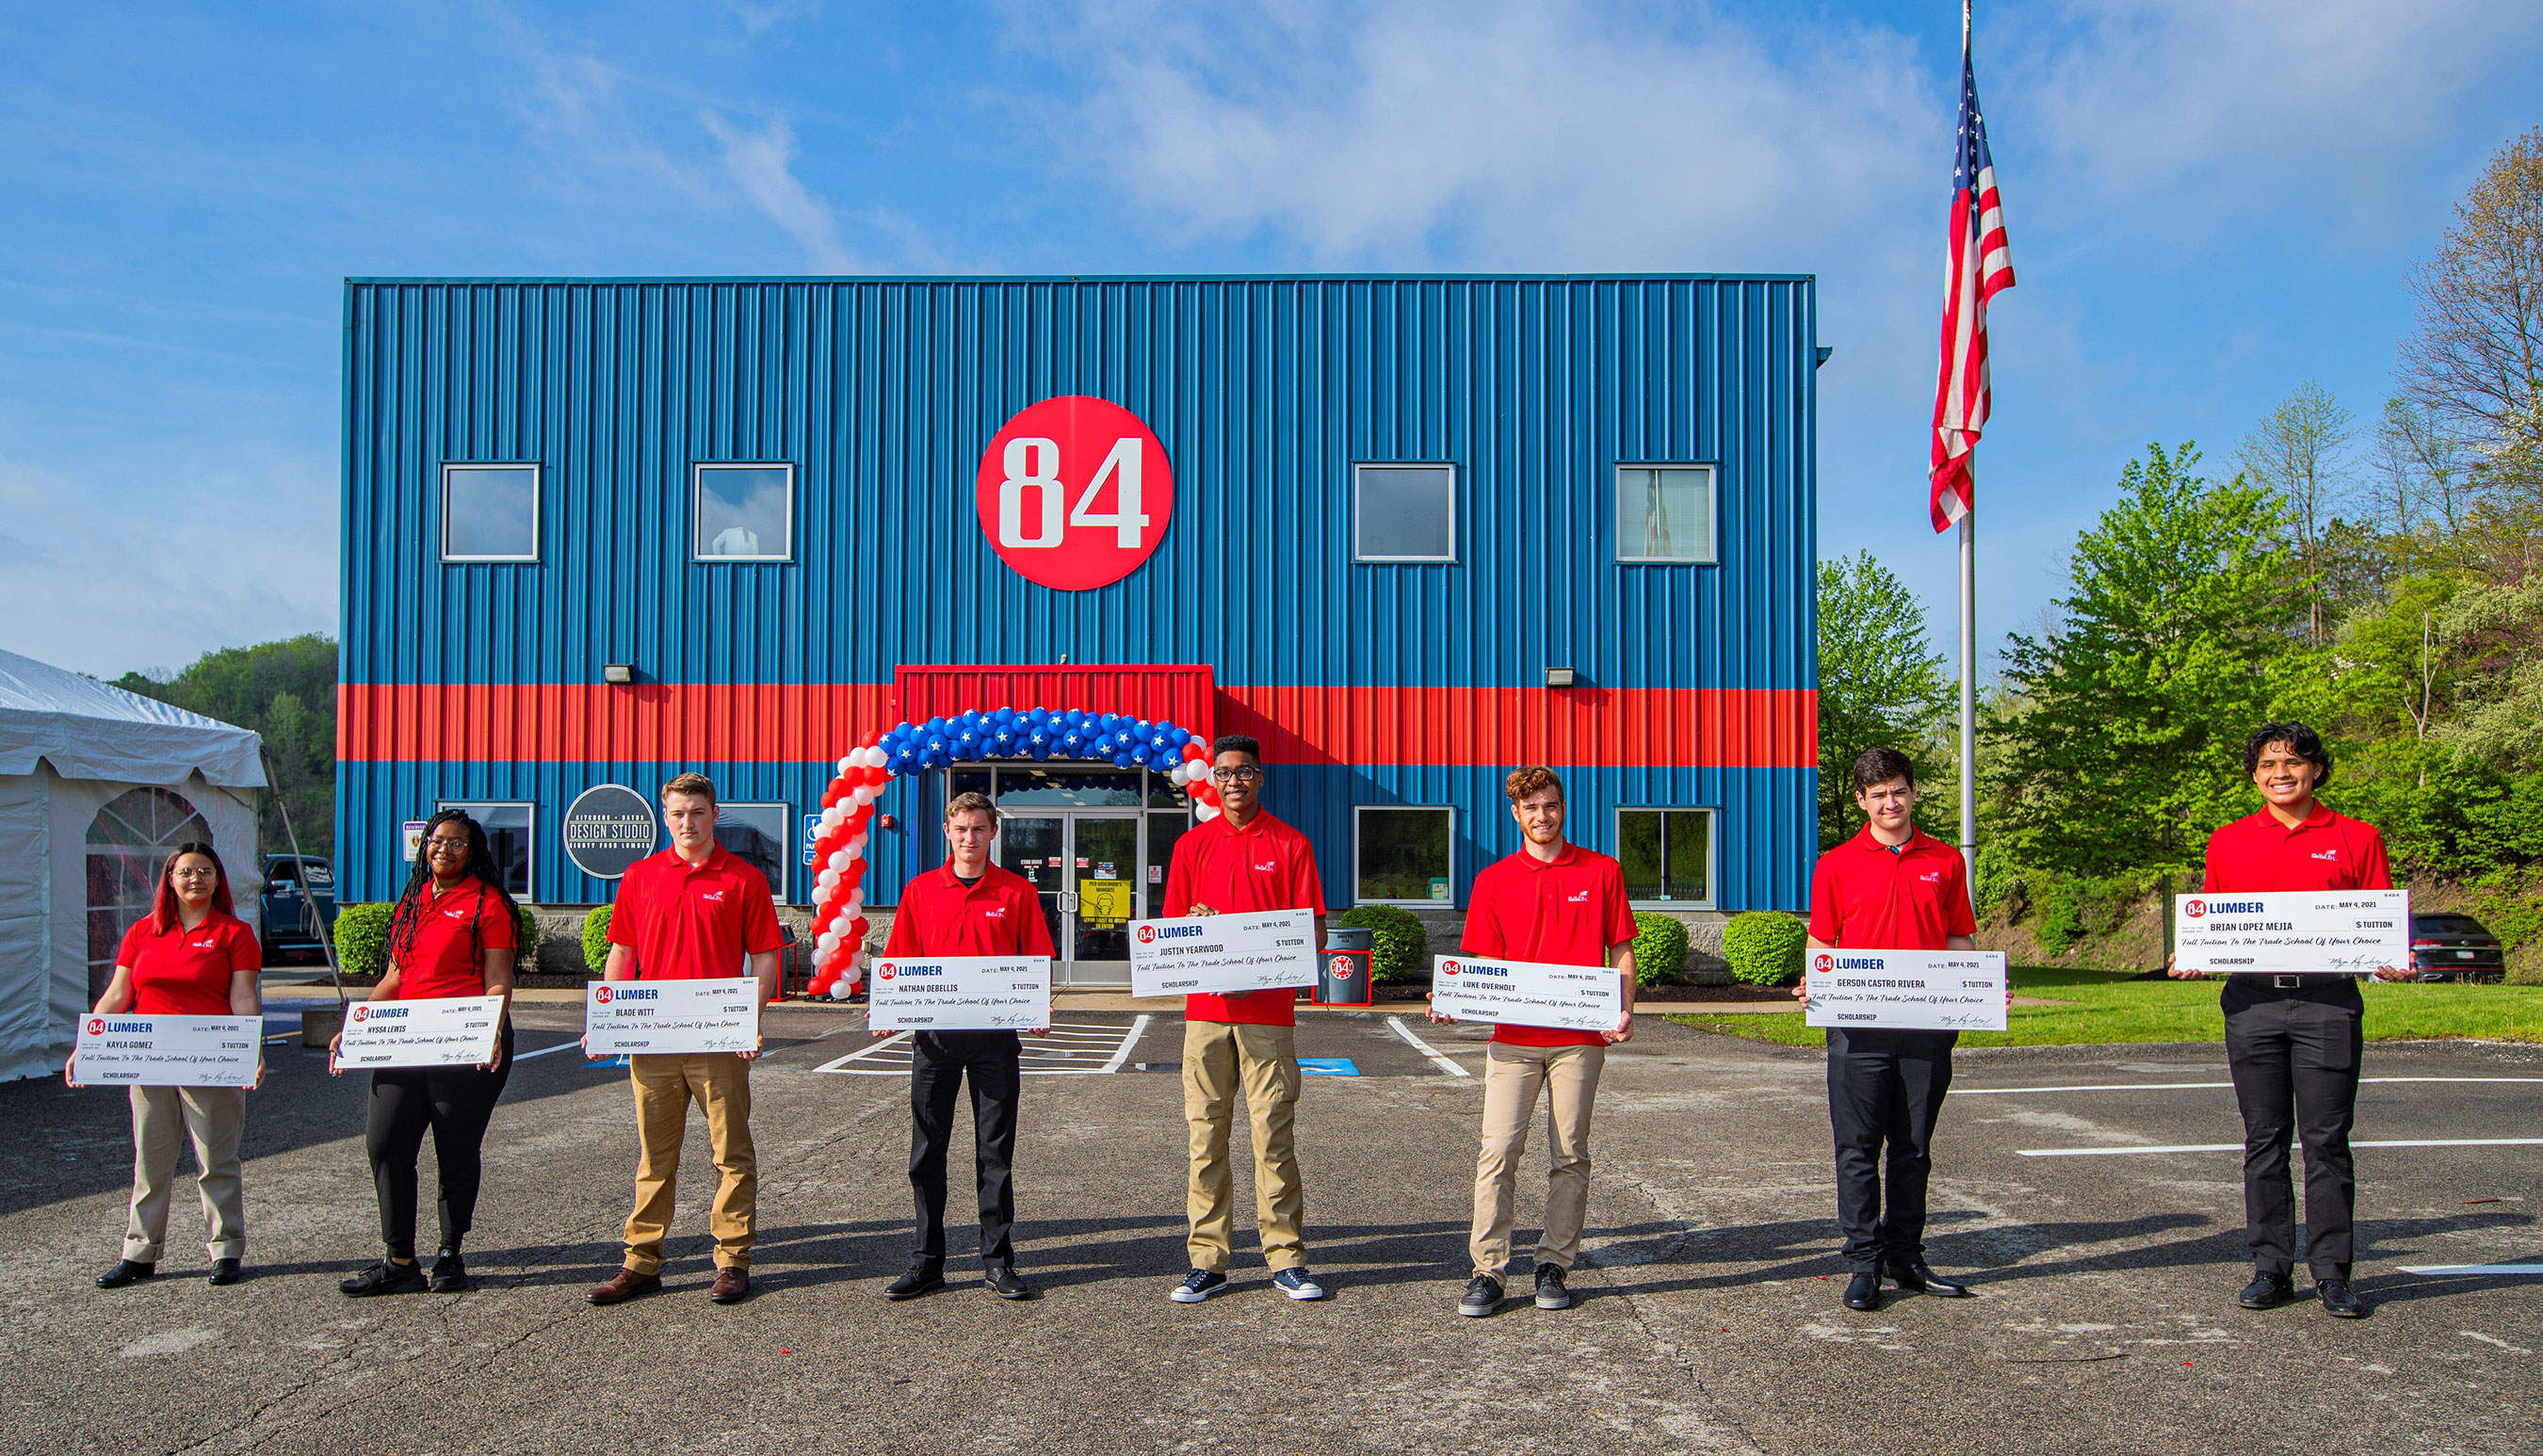 84 Lumber celebrated high school seniors entering the skilled trades and surprised 10 students with scholarships, totaling $50,000, towards the trade school of their choosing.